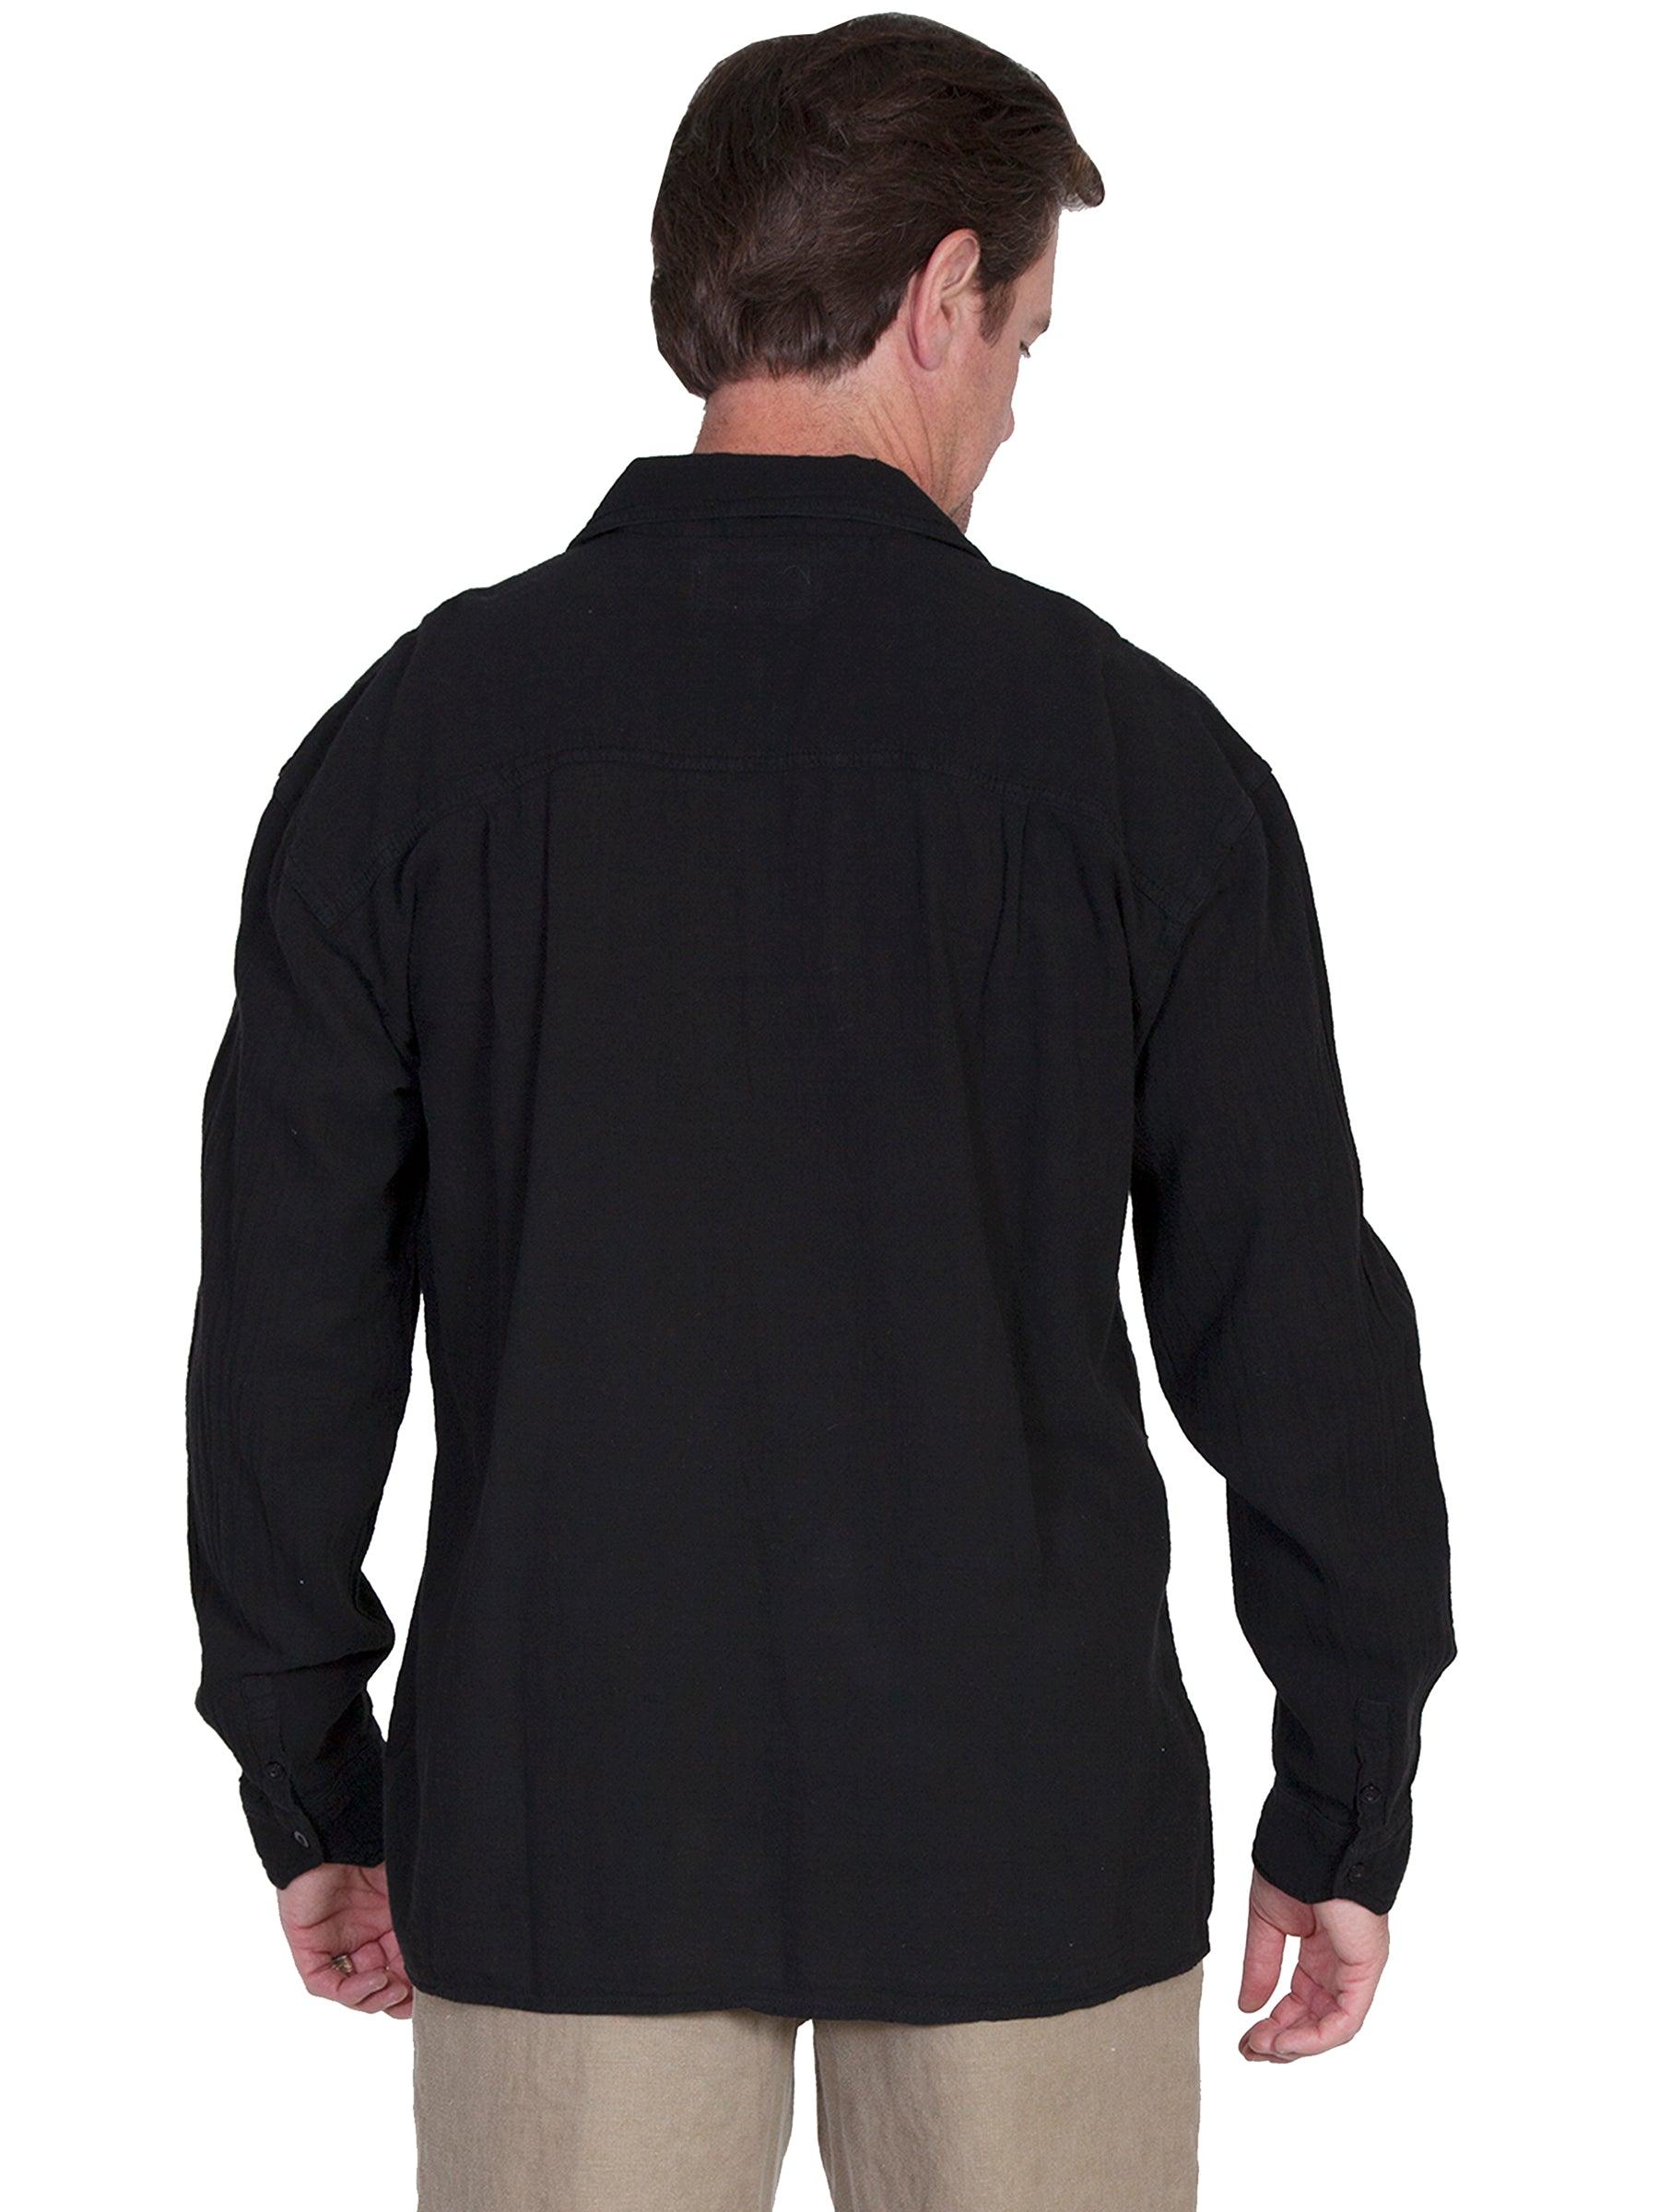 Scully BLACK MEN'S LACE UP FRONT SHIRT - Flyclothing LLC